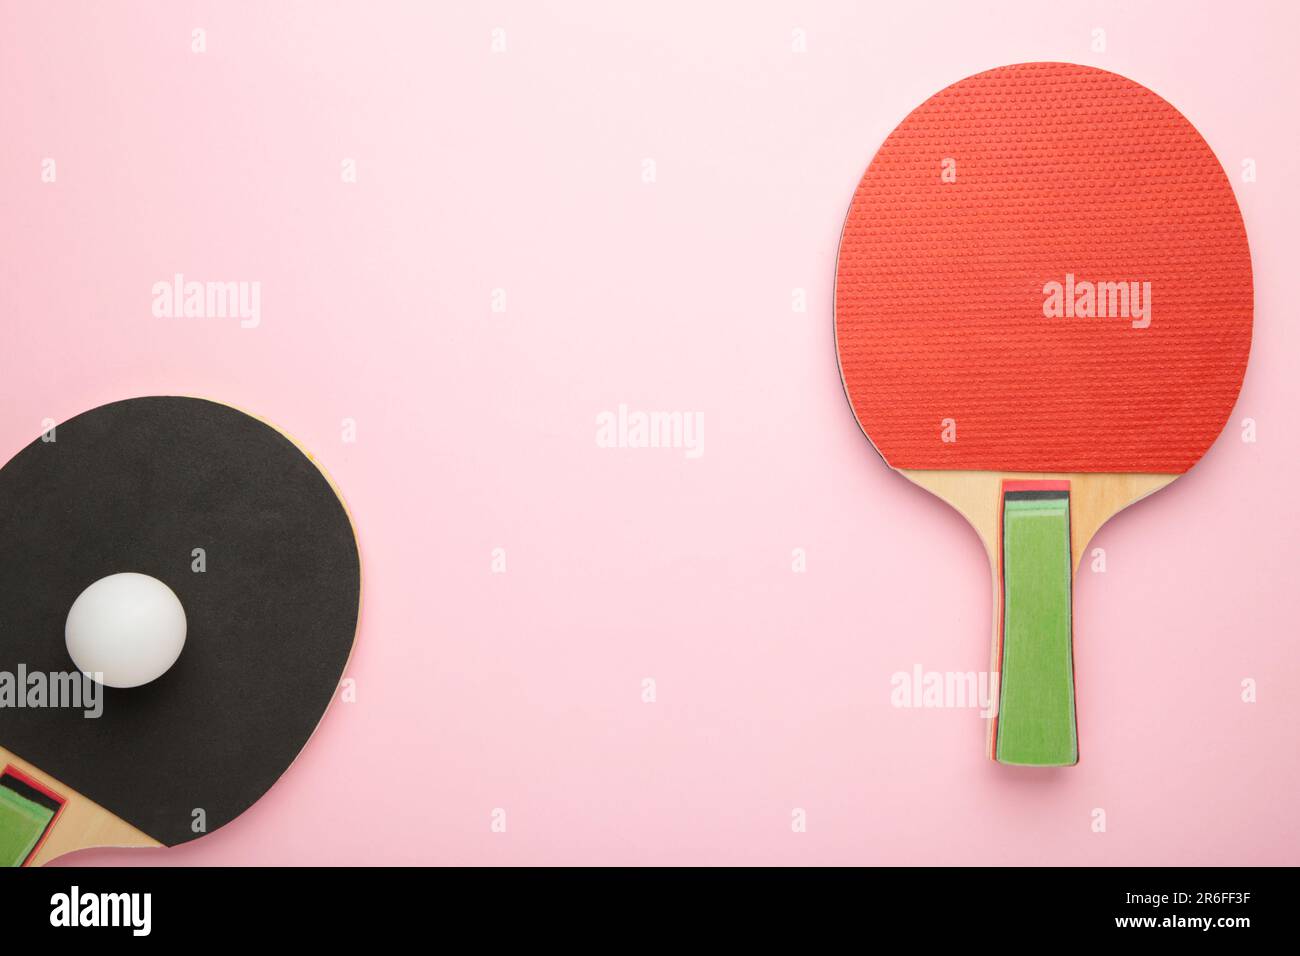 Ping pong rackets and ball on pink background. Top view Stock Photo